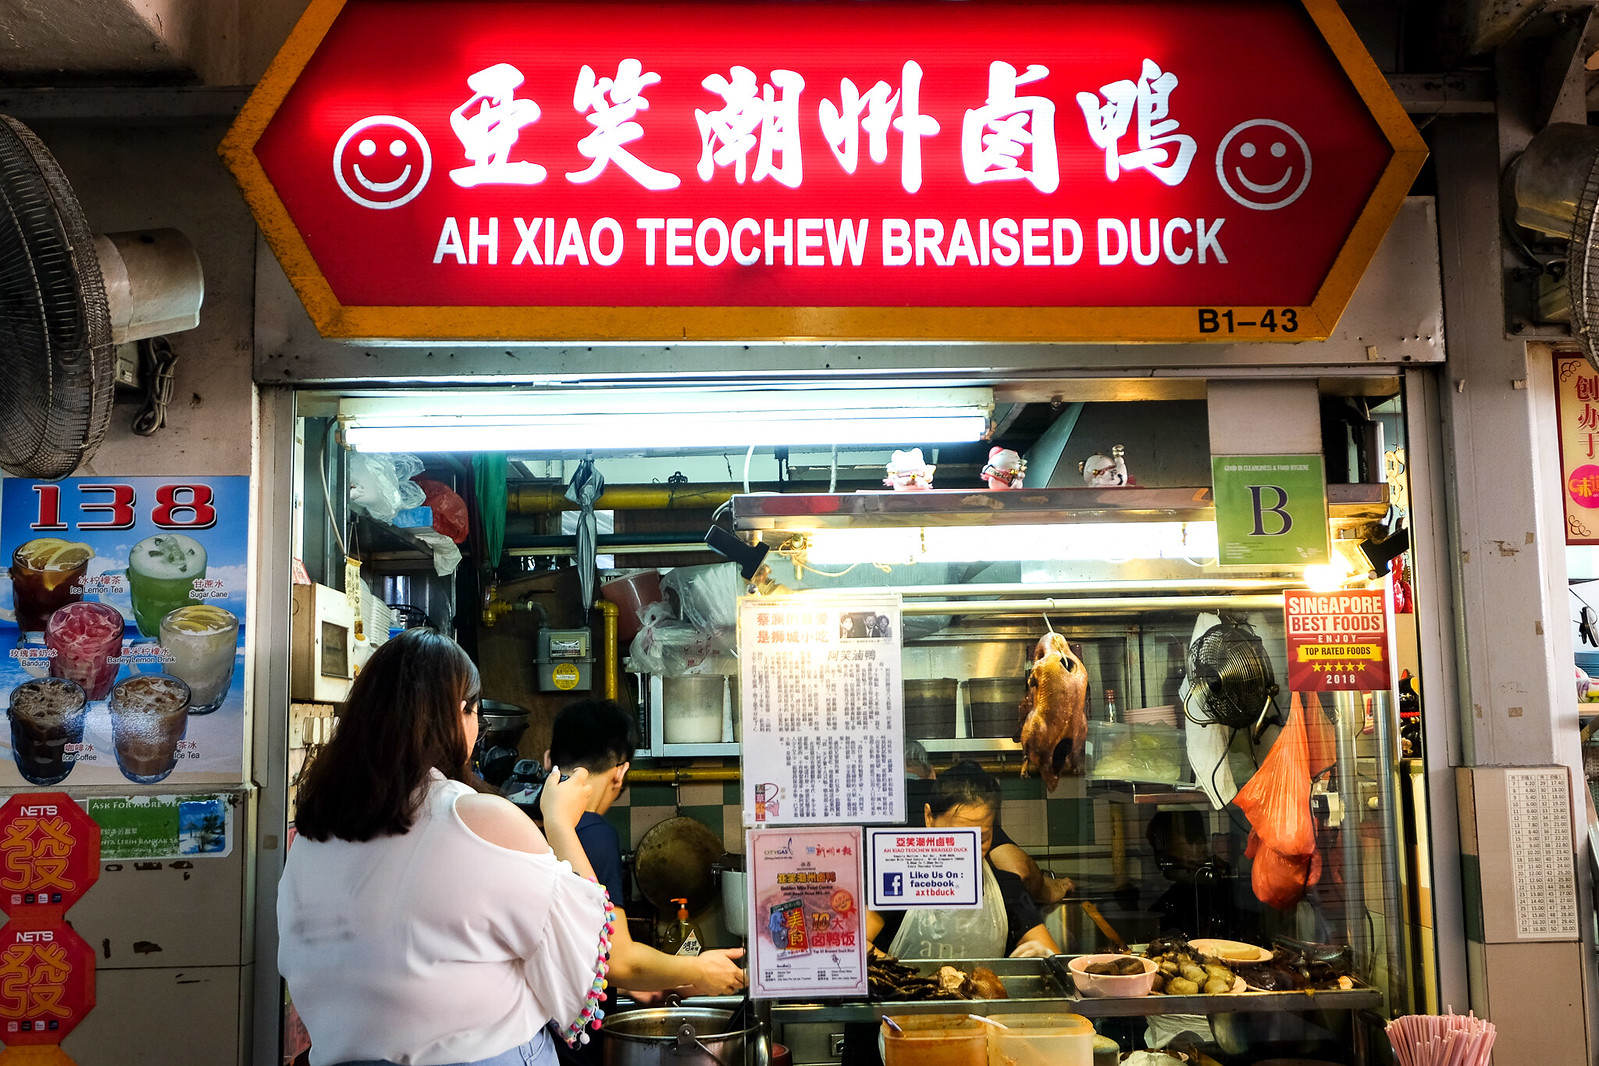 Ah Xiao Teochew Braised Duck Stall